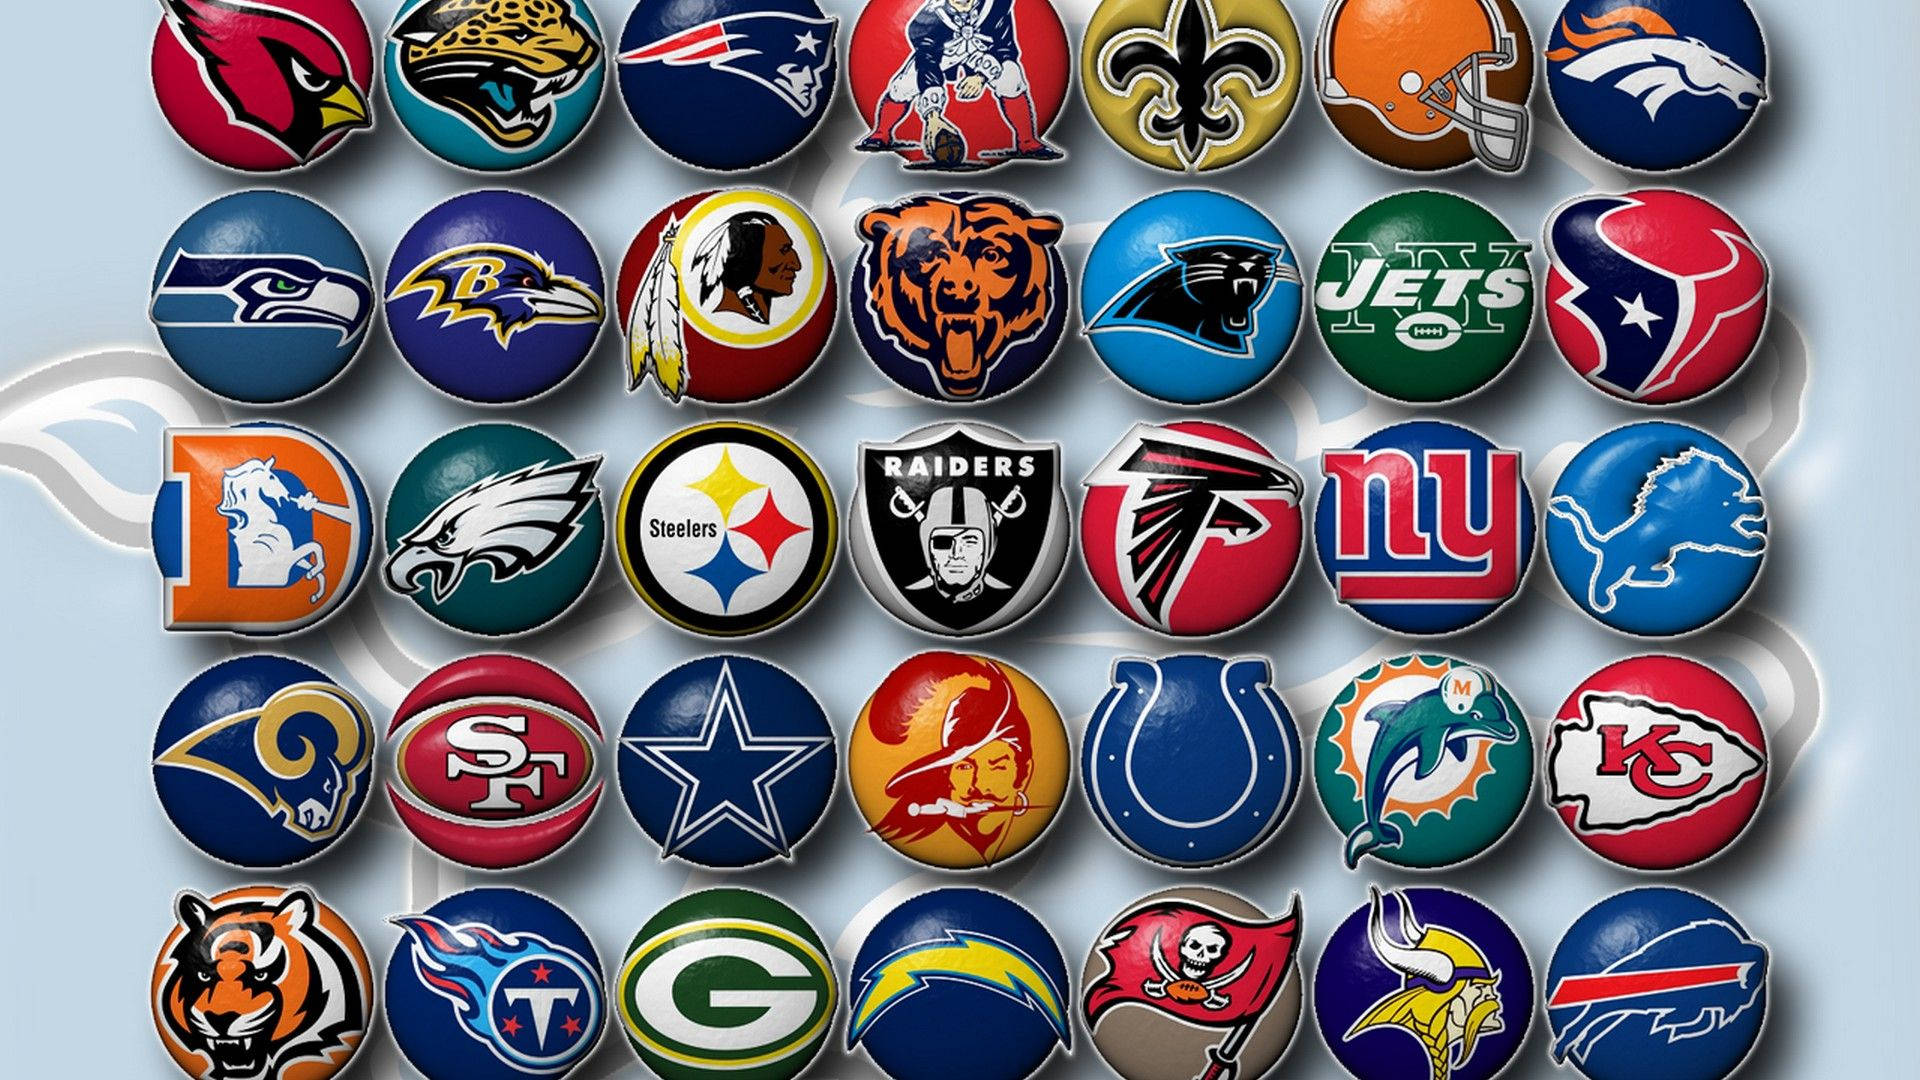 "a Fan Ready To Show Their Support For Their Favorite Nfl Team!" Wallpaper